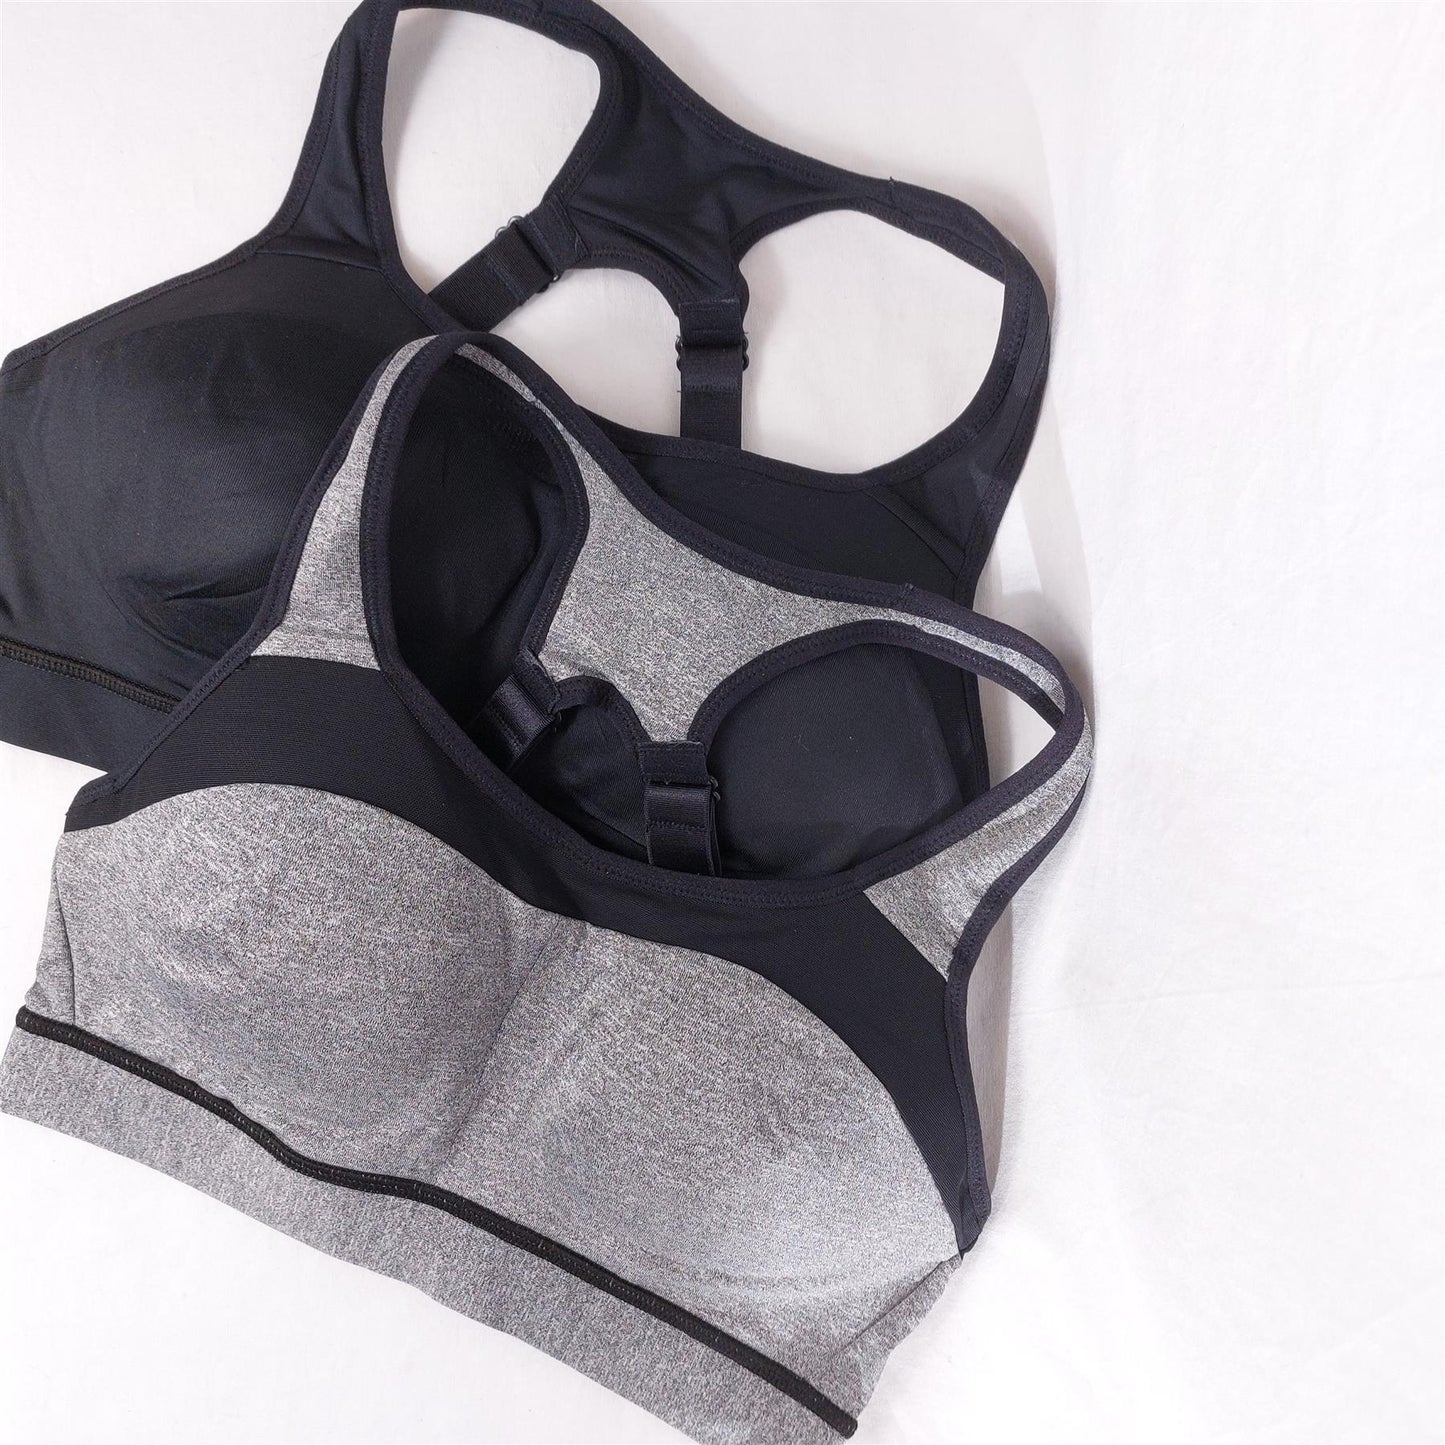 Athletic Works Sports Bra Non-Wired High Impact Racerback Removable Padding